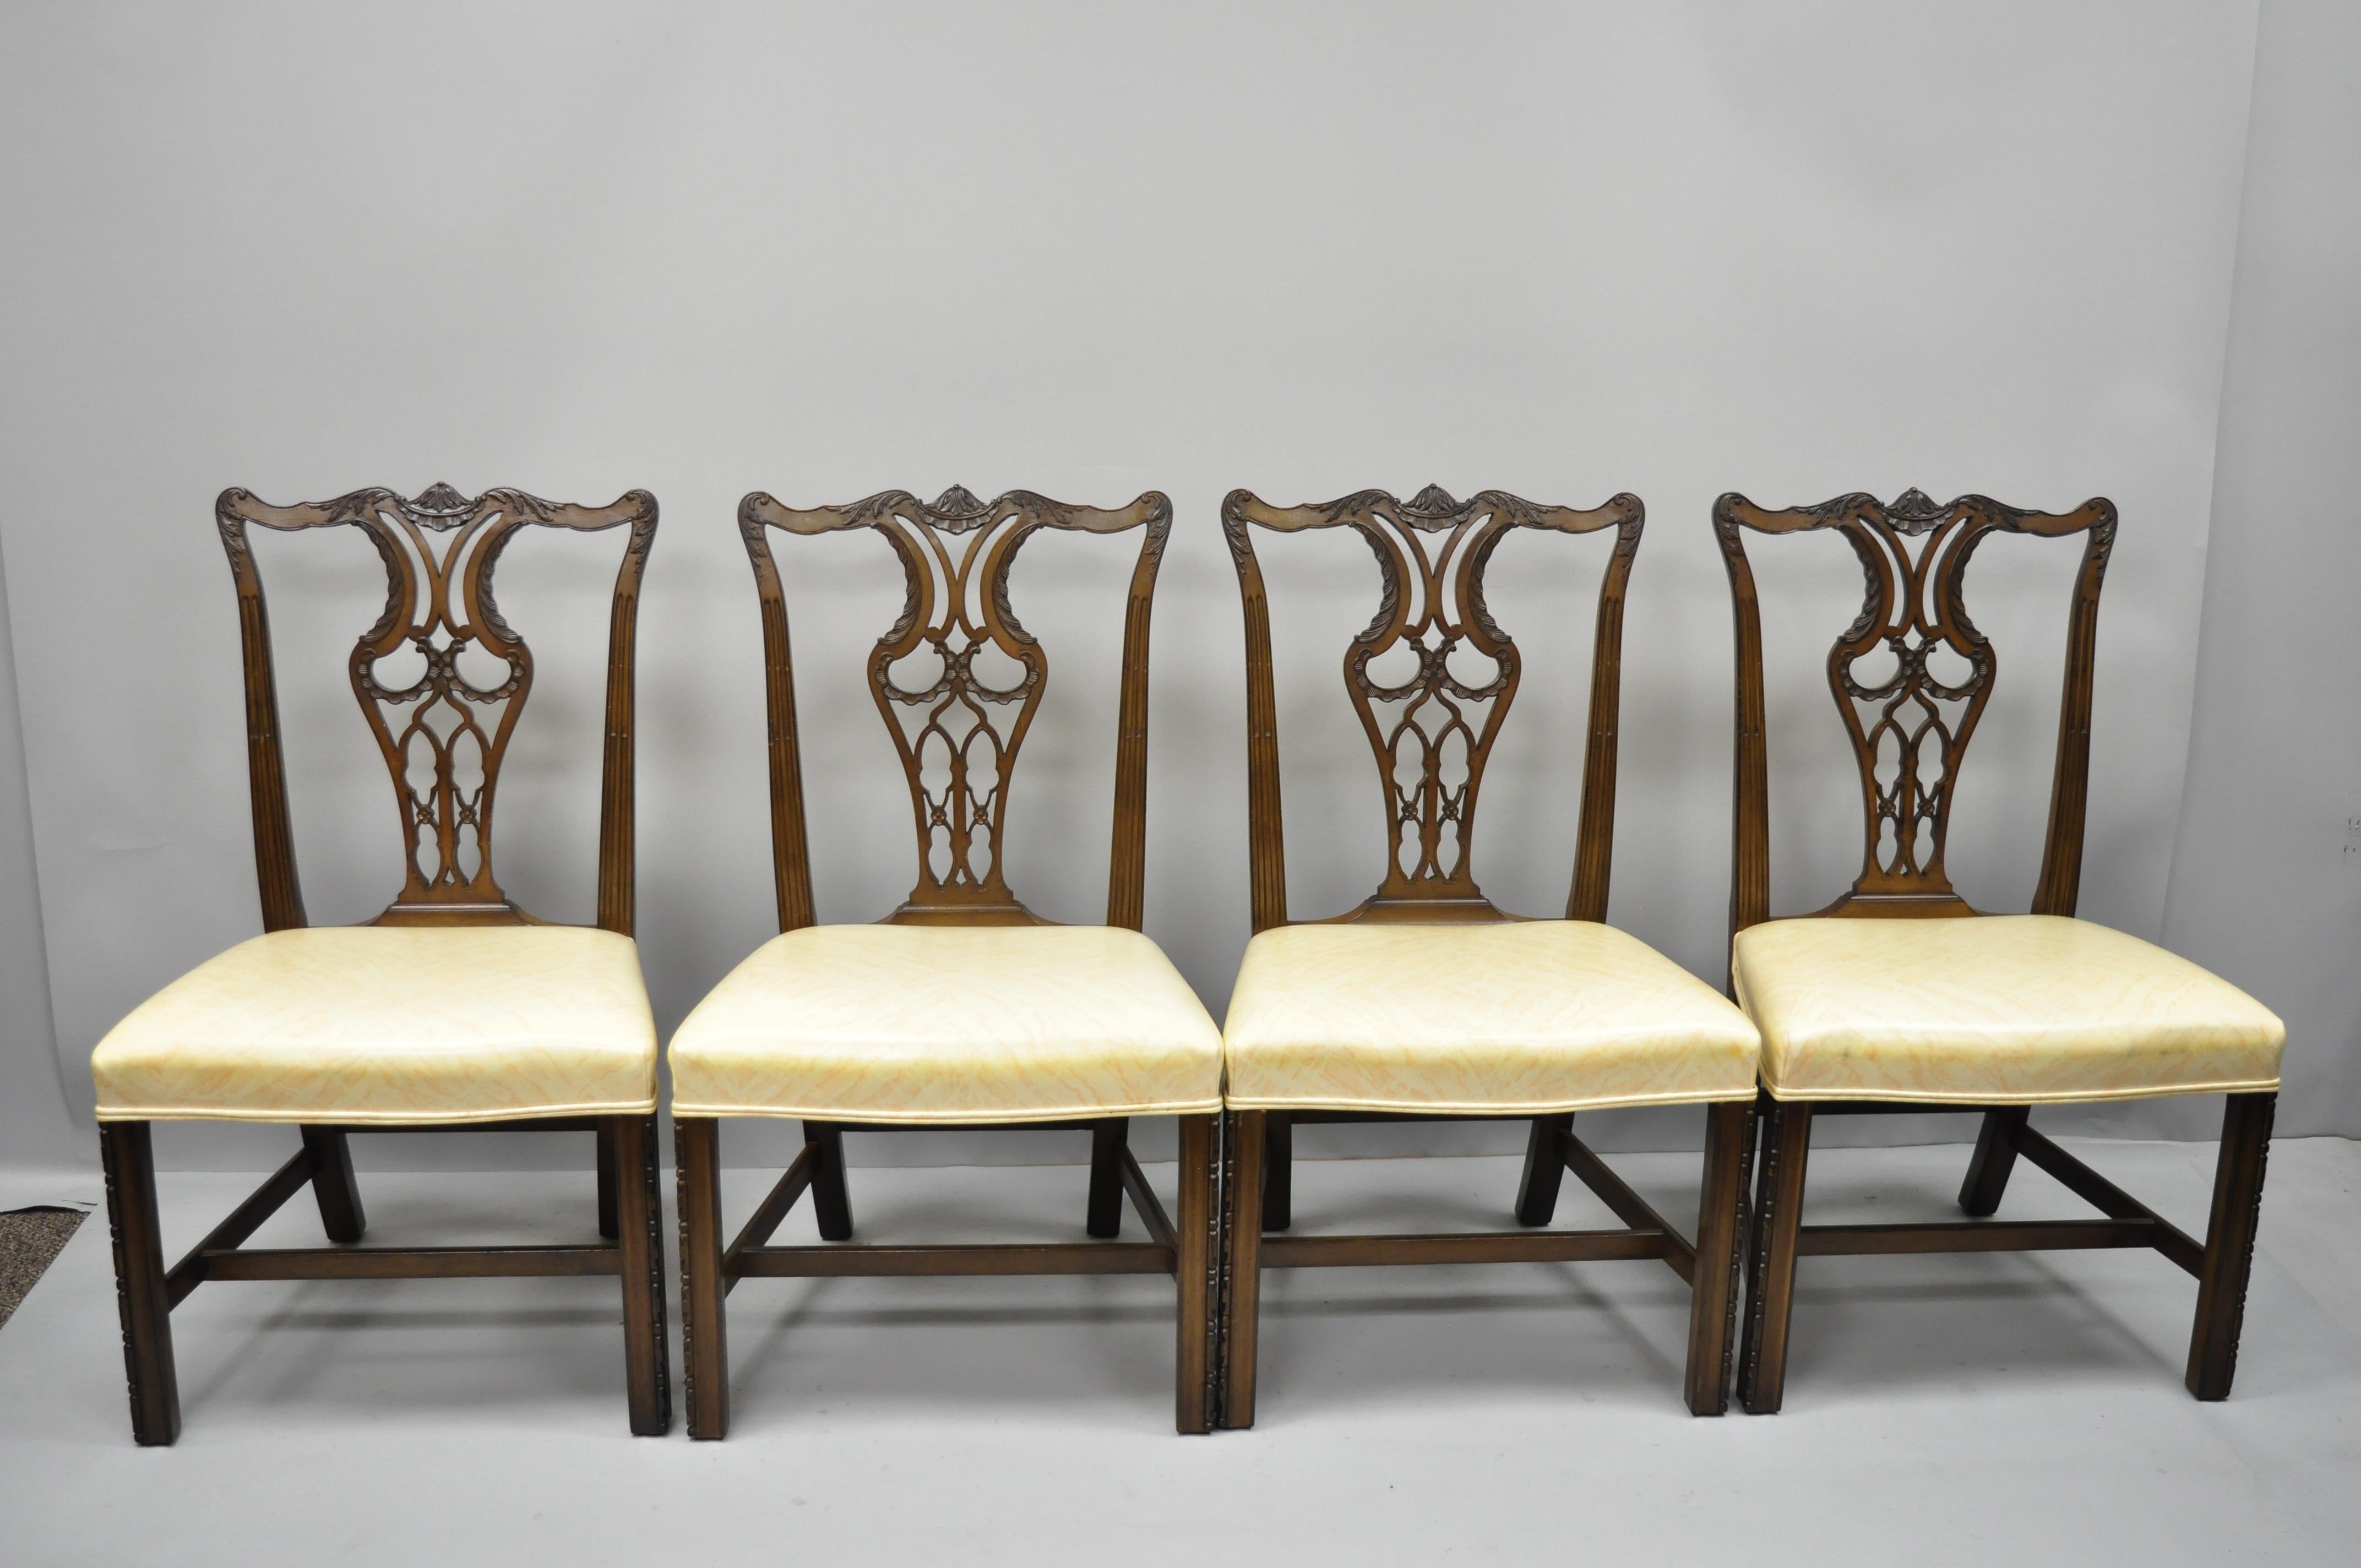 Set of 4 antique mahogany pagoda carved Chinese Chippendale style dining chairs. Listing includes pagoda carved top rail, vinyl upholstered seats, solid wood construction, beautiful wood grain, nicely carved details, great style and form, circa